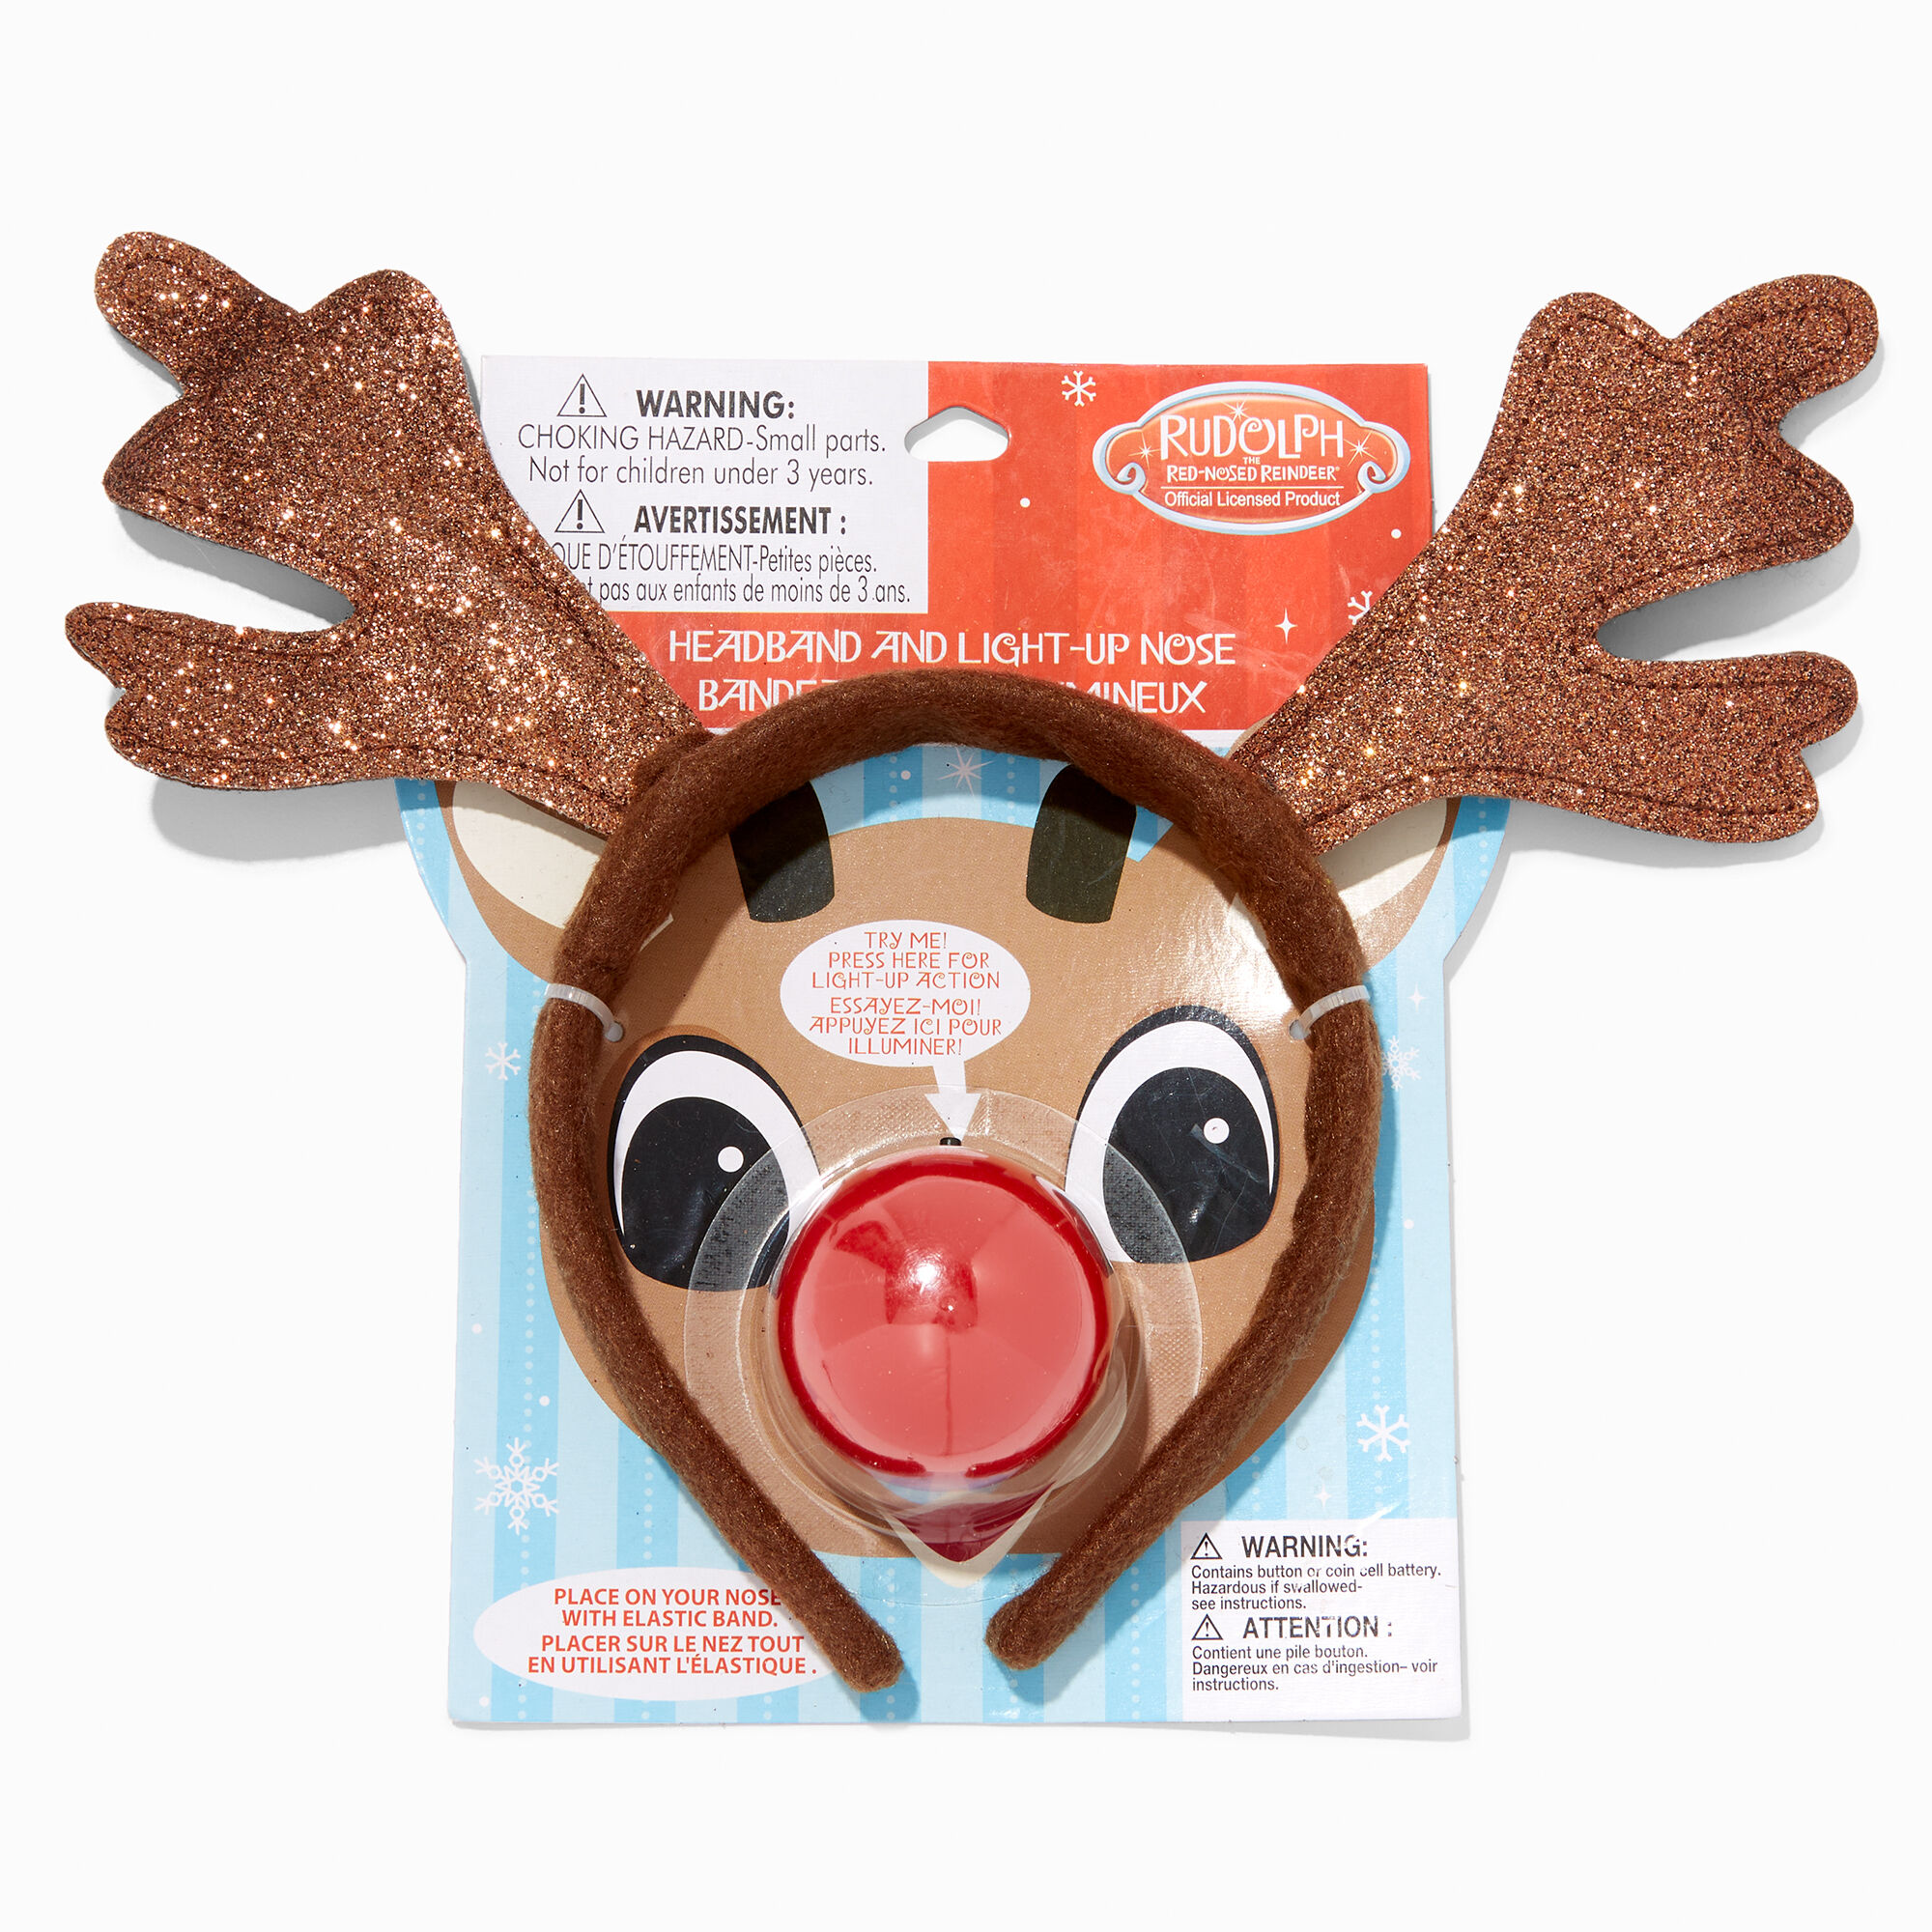 View Claires Rudolph The Nosed Reindeer Antler Headband LightUp Nose Set Red information